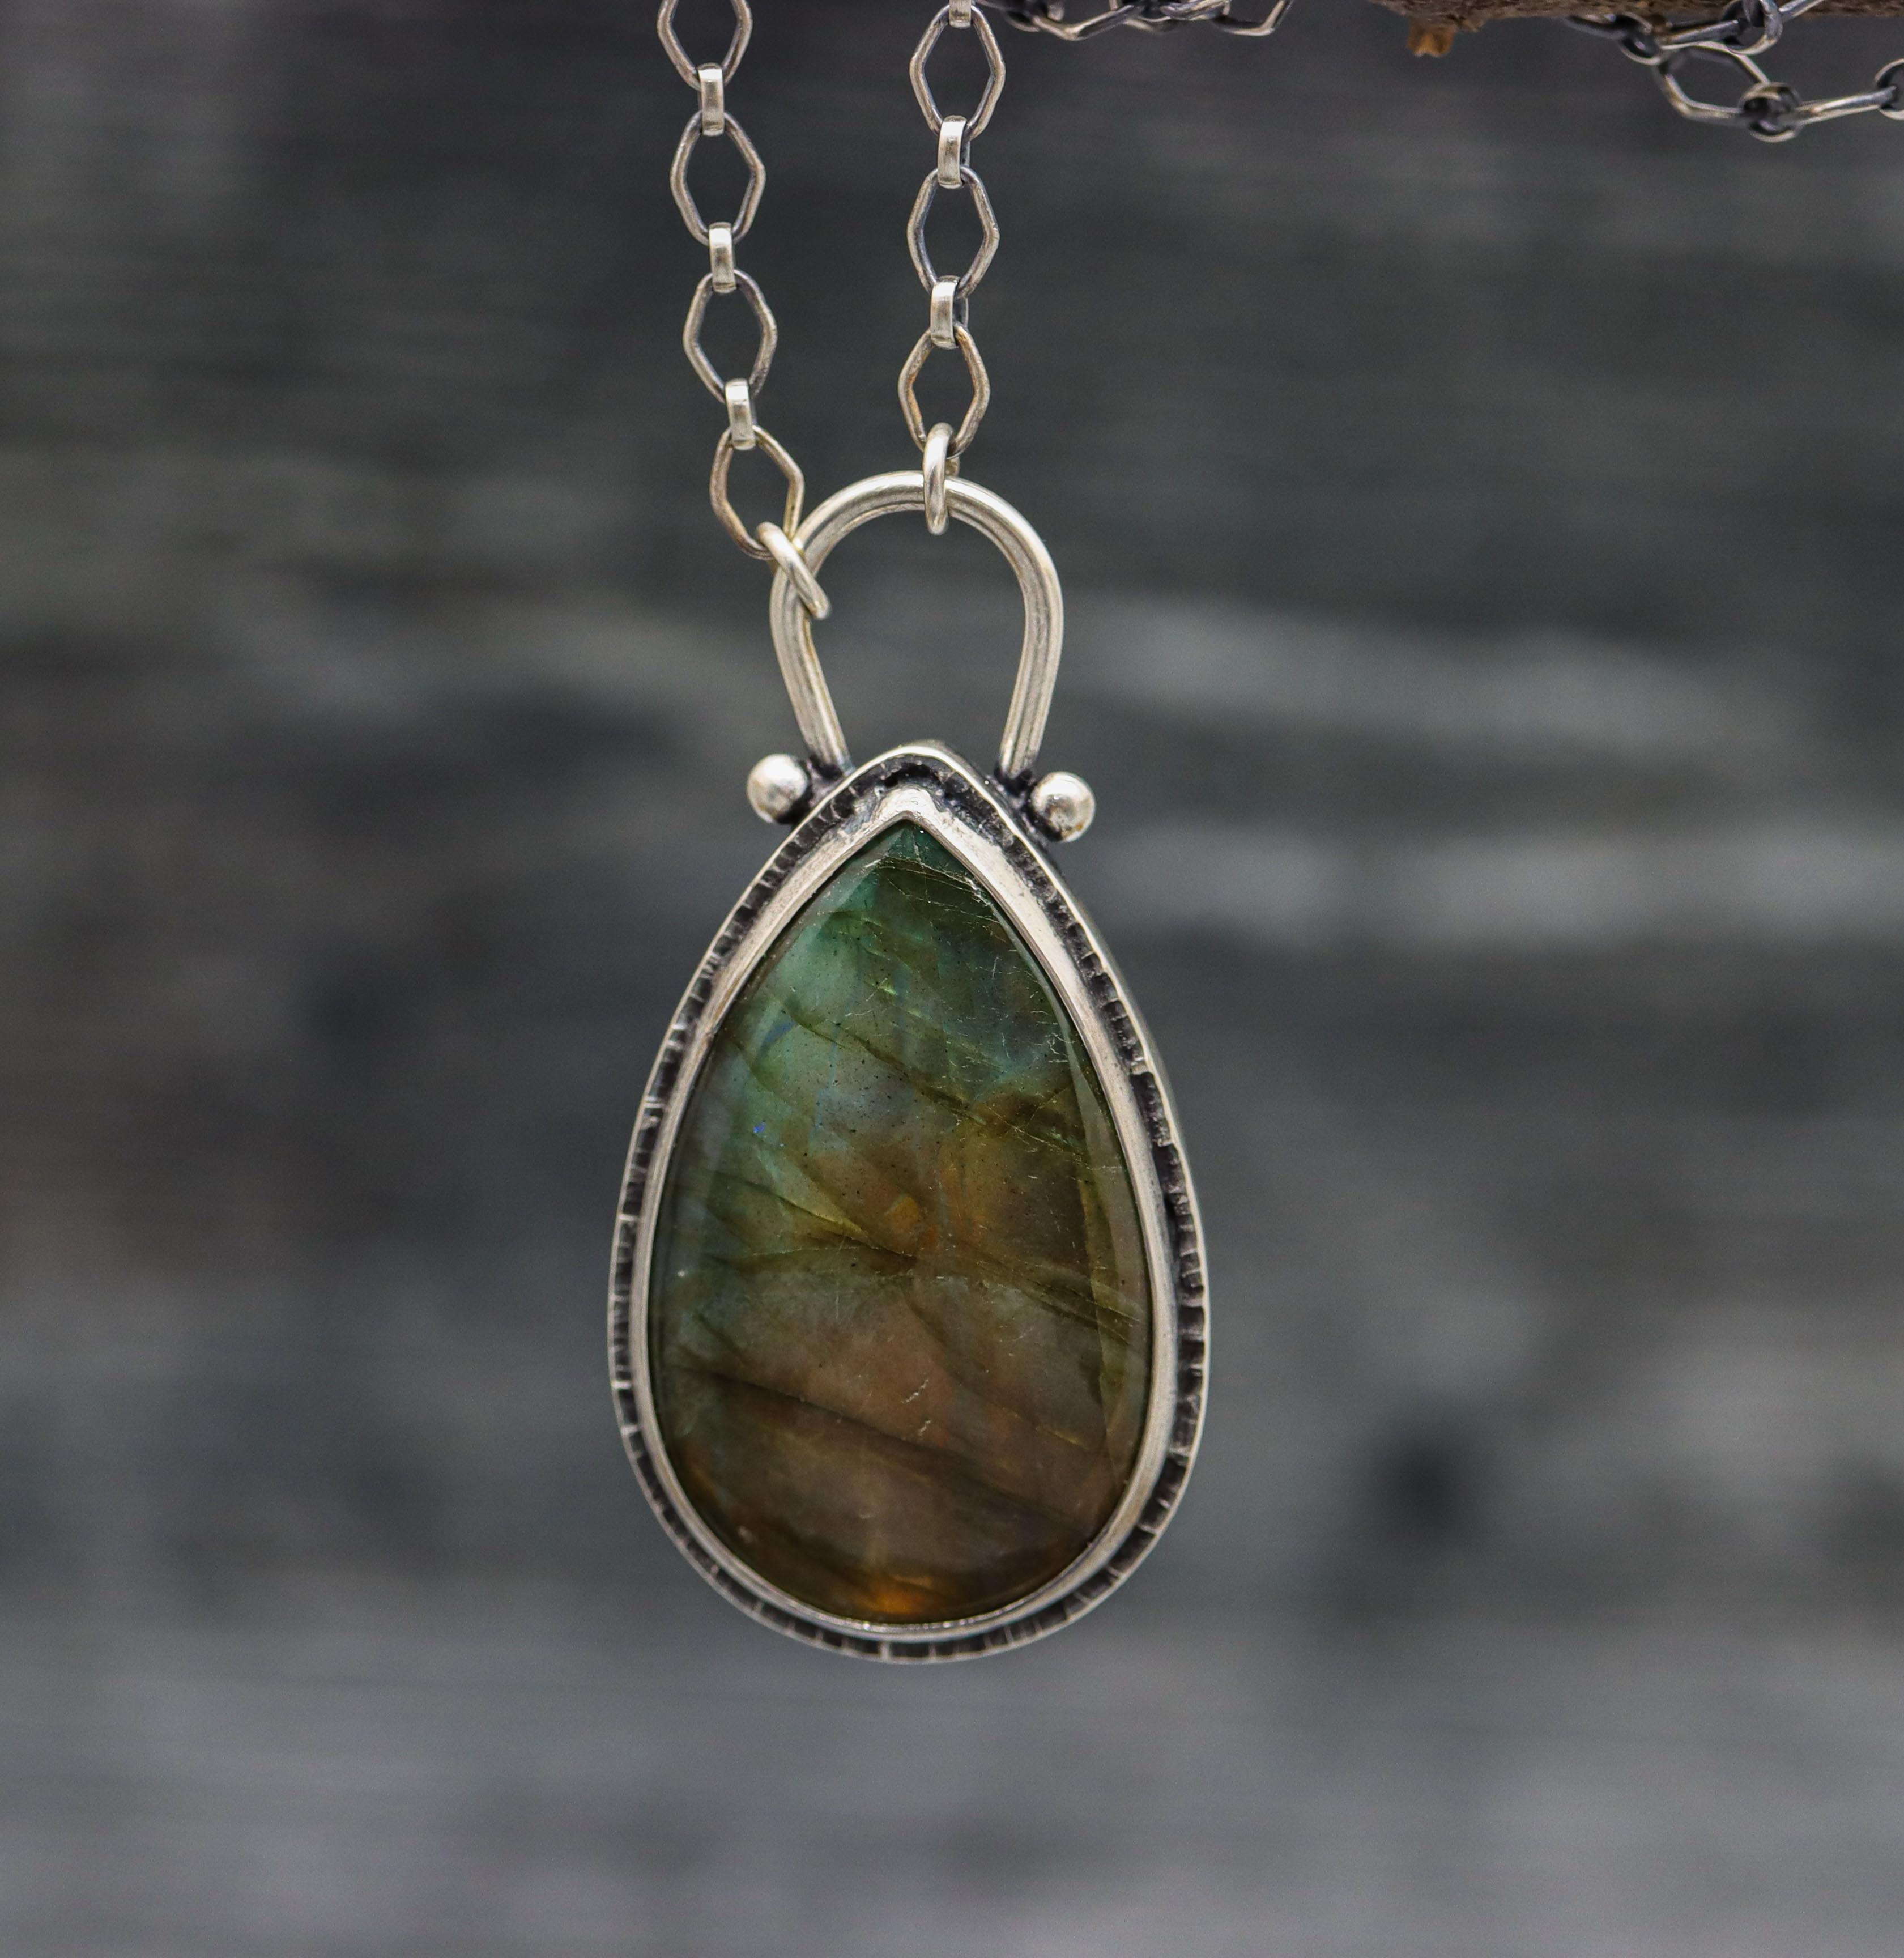 Flashy Labradorite Pendant Sterling Silver One Of a Kind Gemstone Necklace